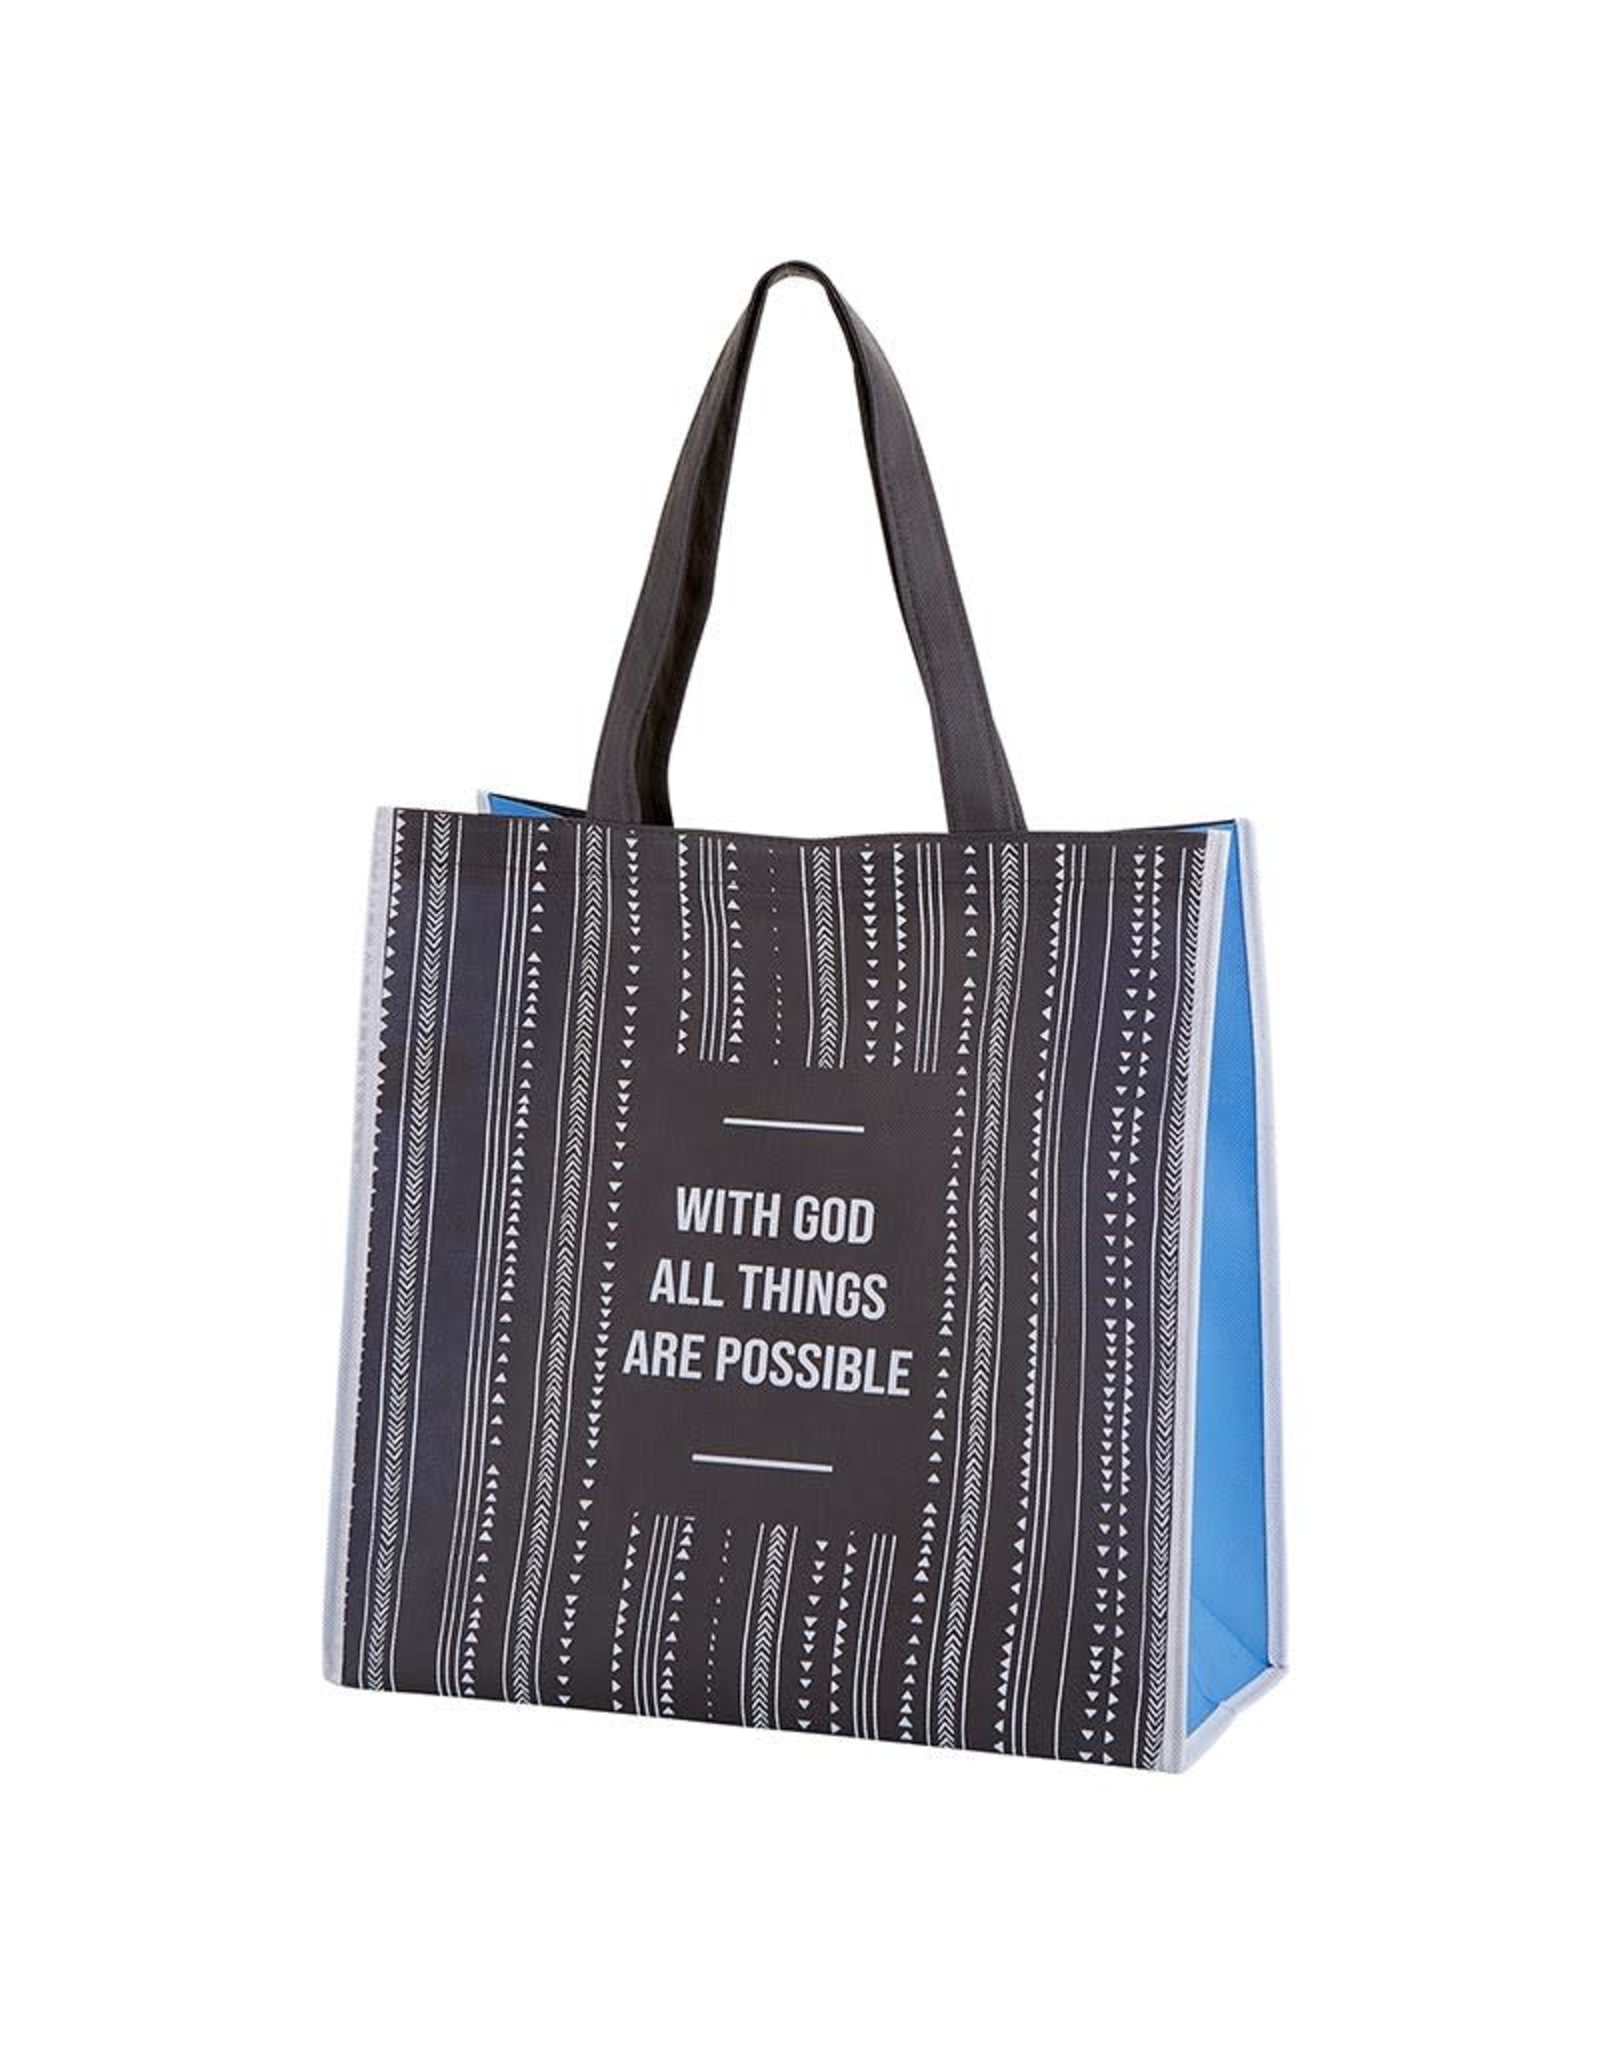 Faithworks Reusable Shopping Tote Bag - All Things are Possible